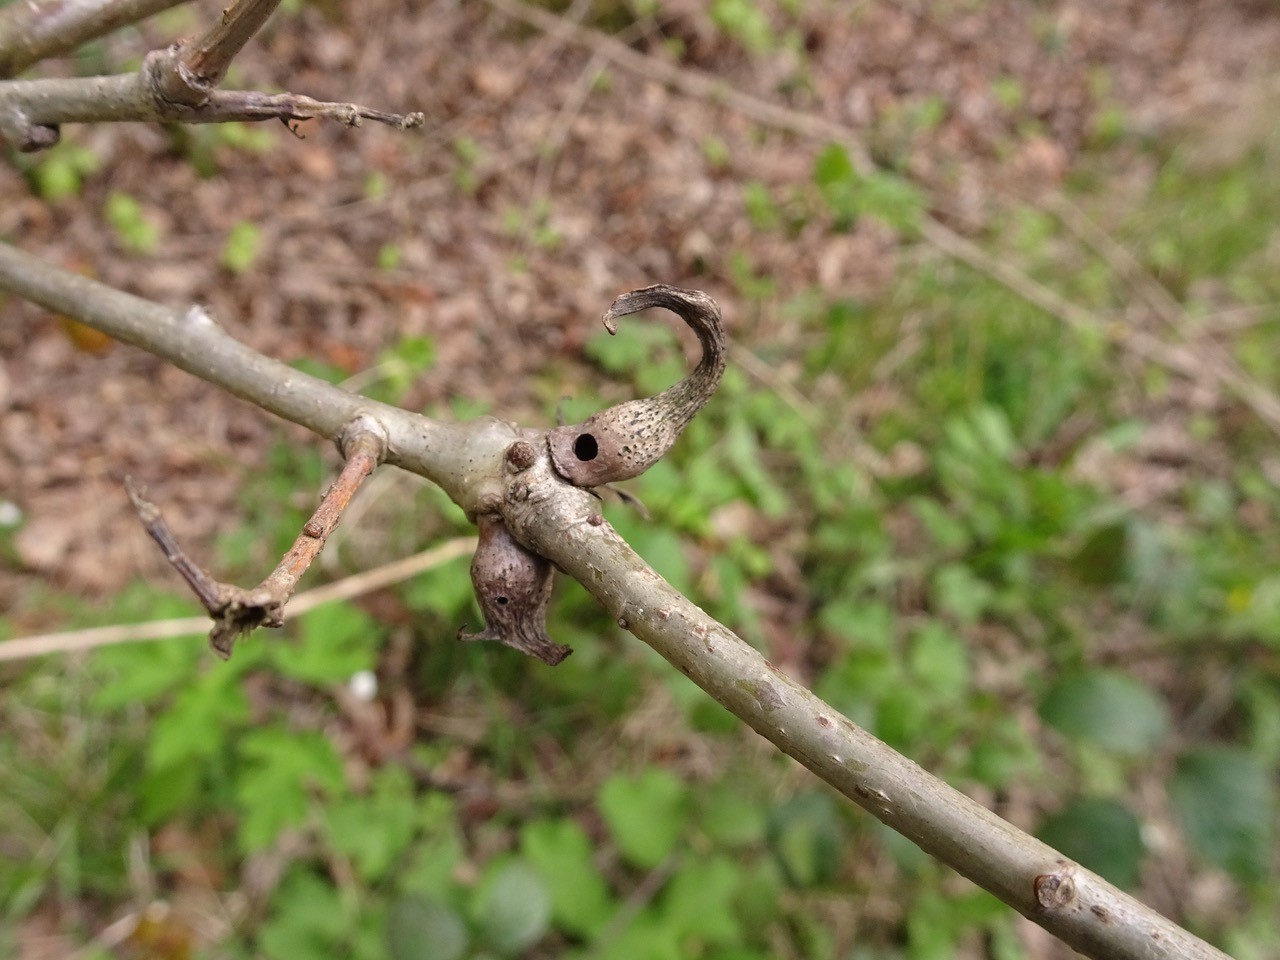 Andricus aries-old gall after wasp has emerged Wadworth Wood